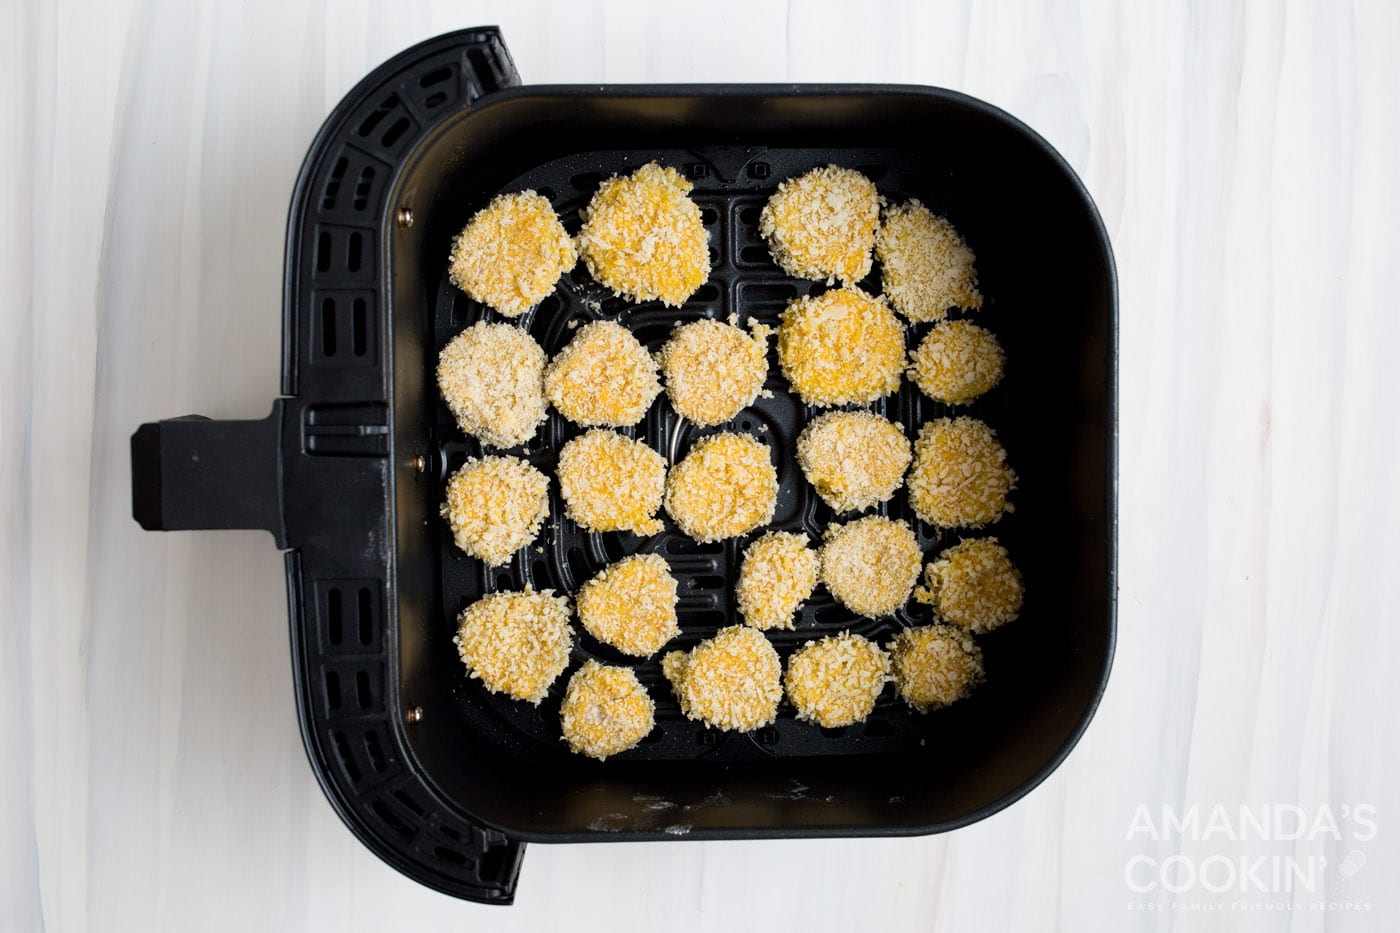 panko coated pickle chips in an air fryer basket